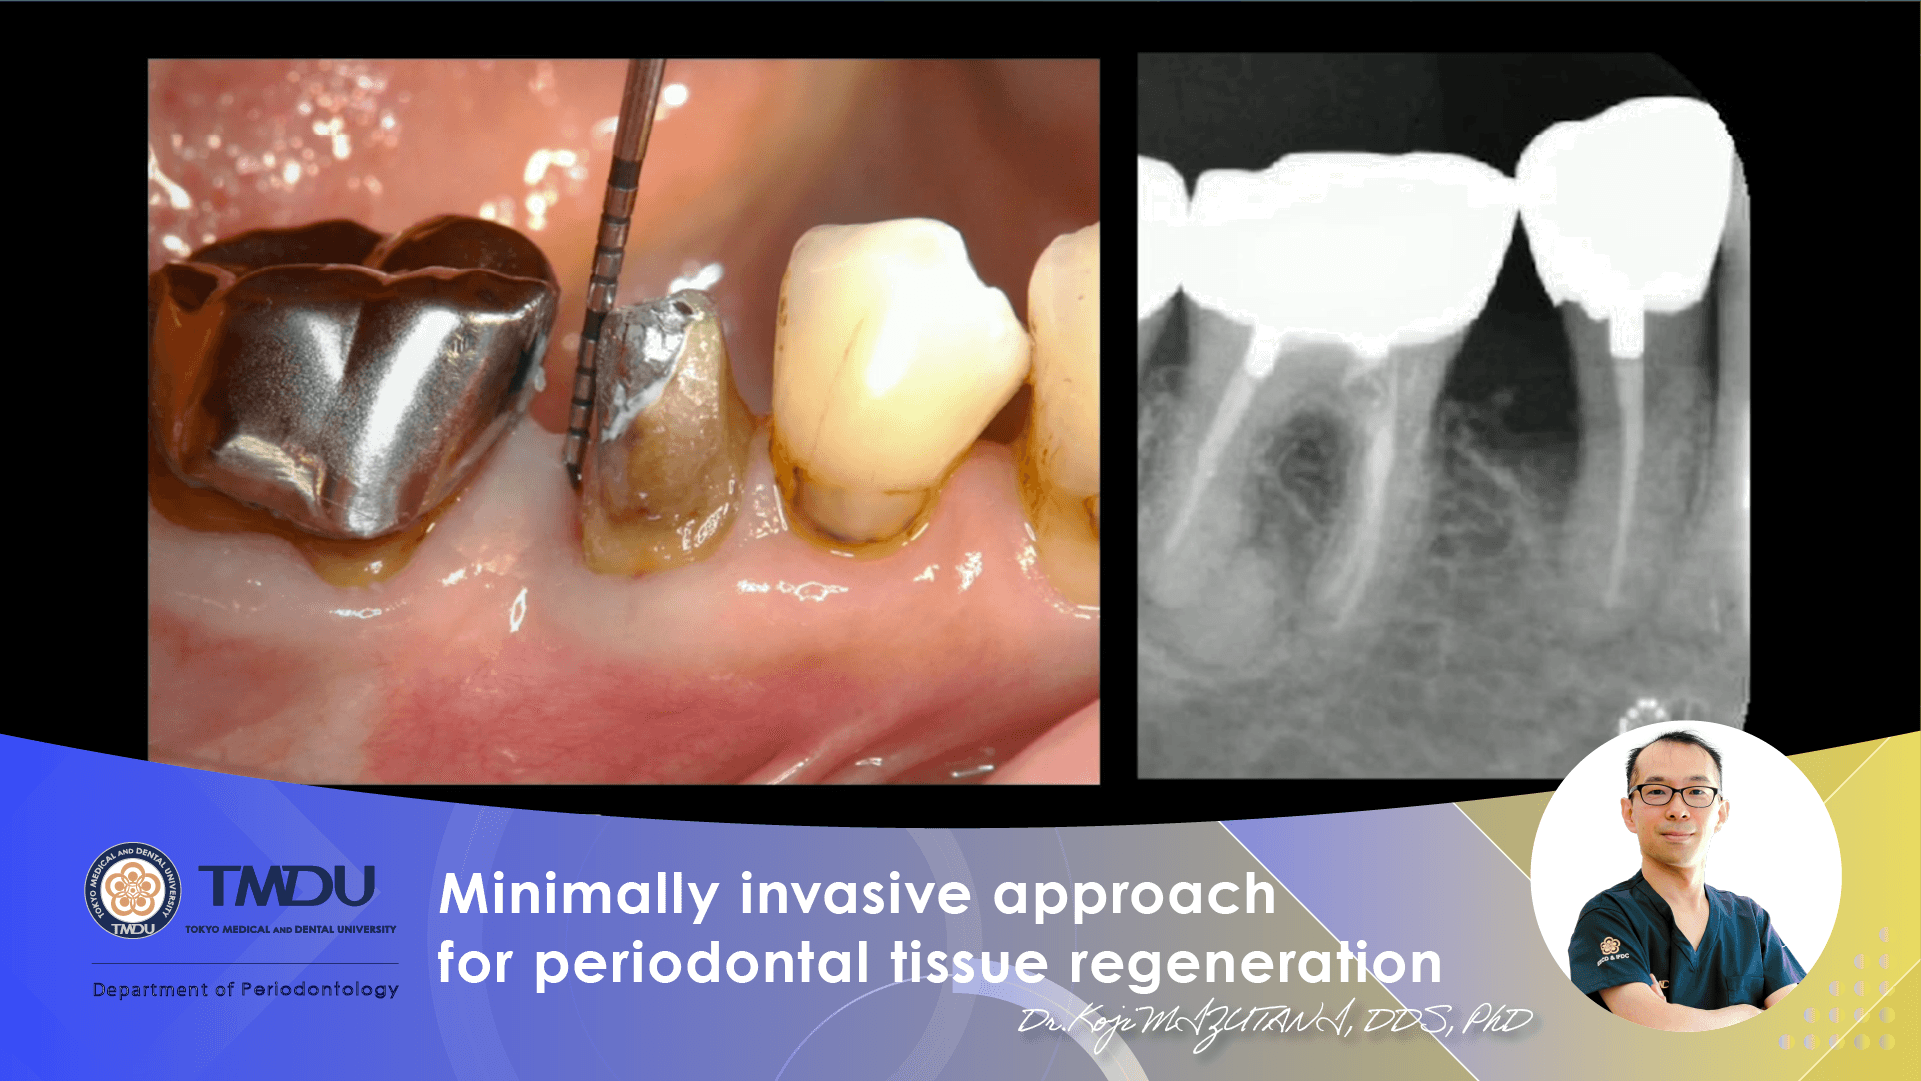 Minimally invasive approach for periodontal tissue regeneration